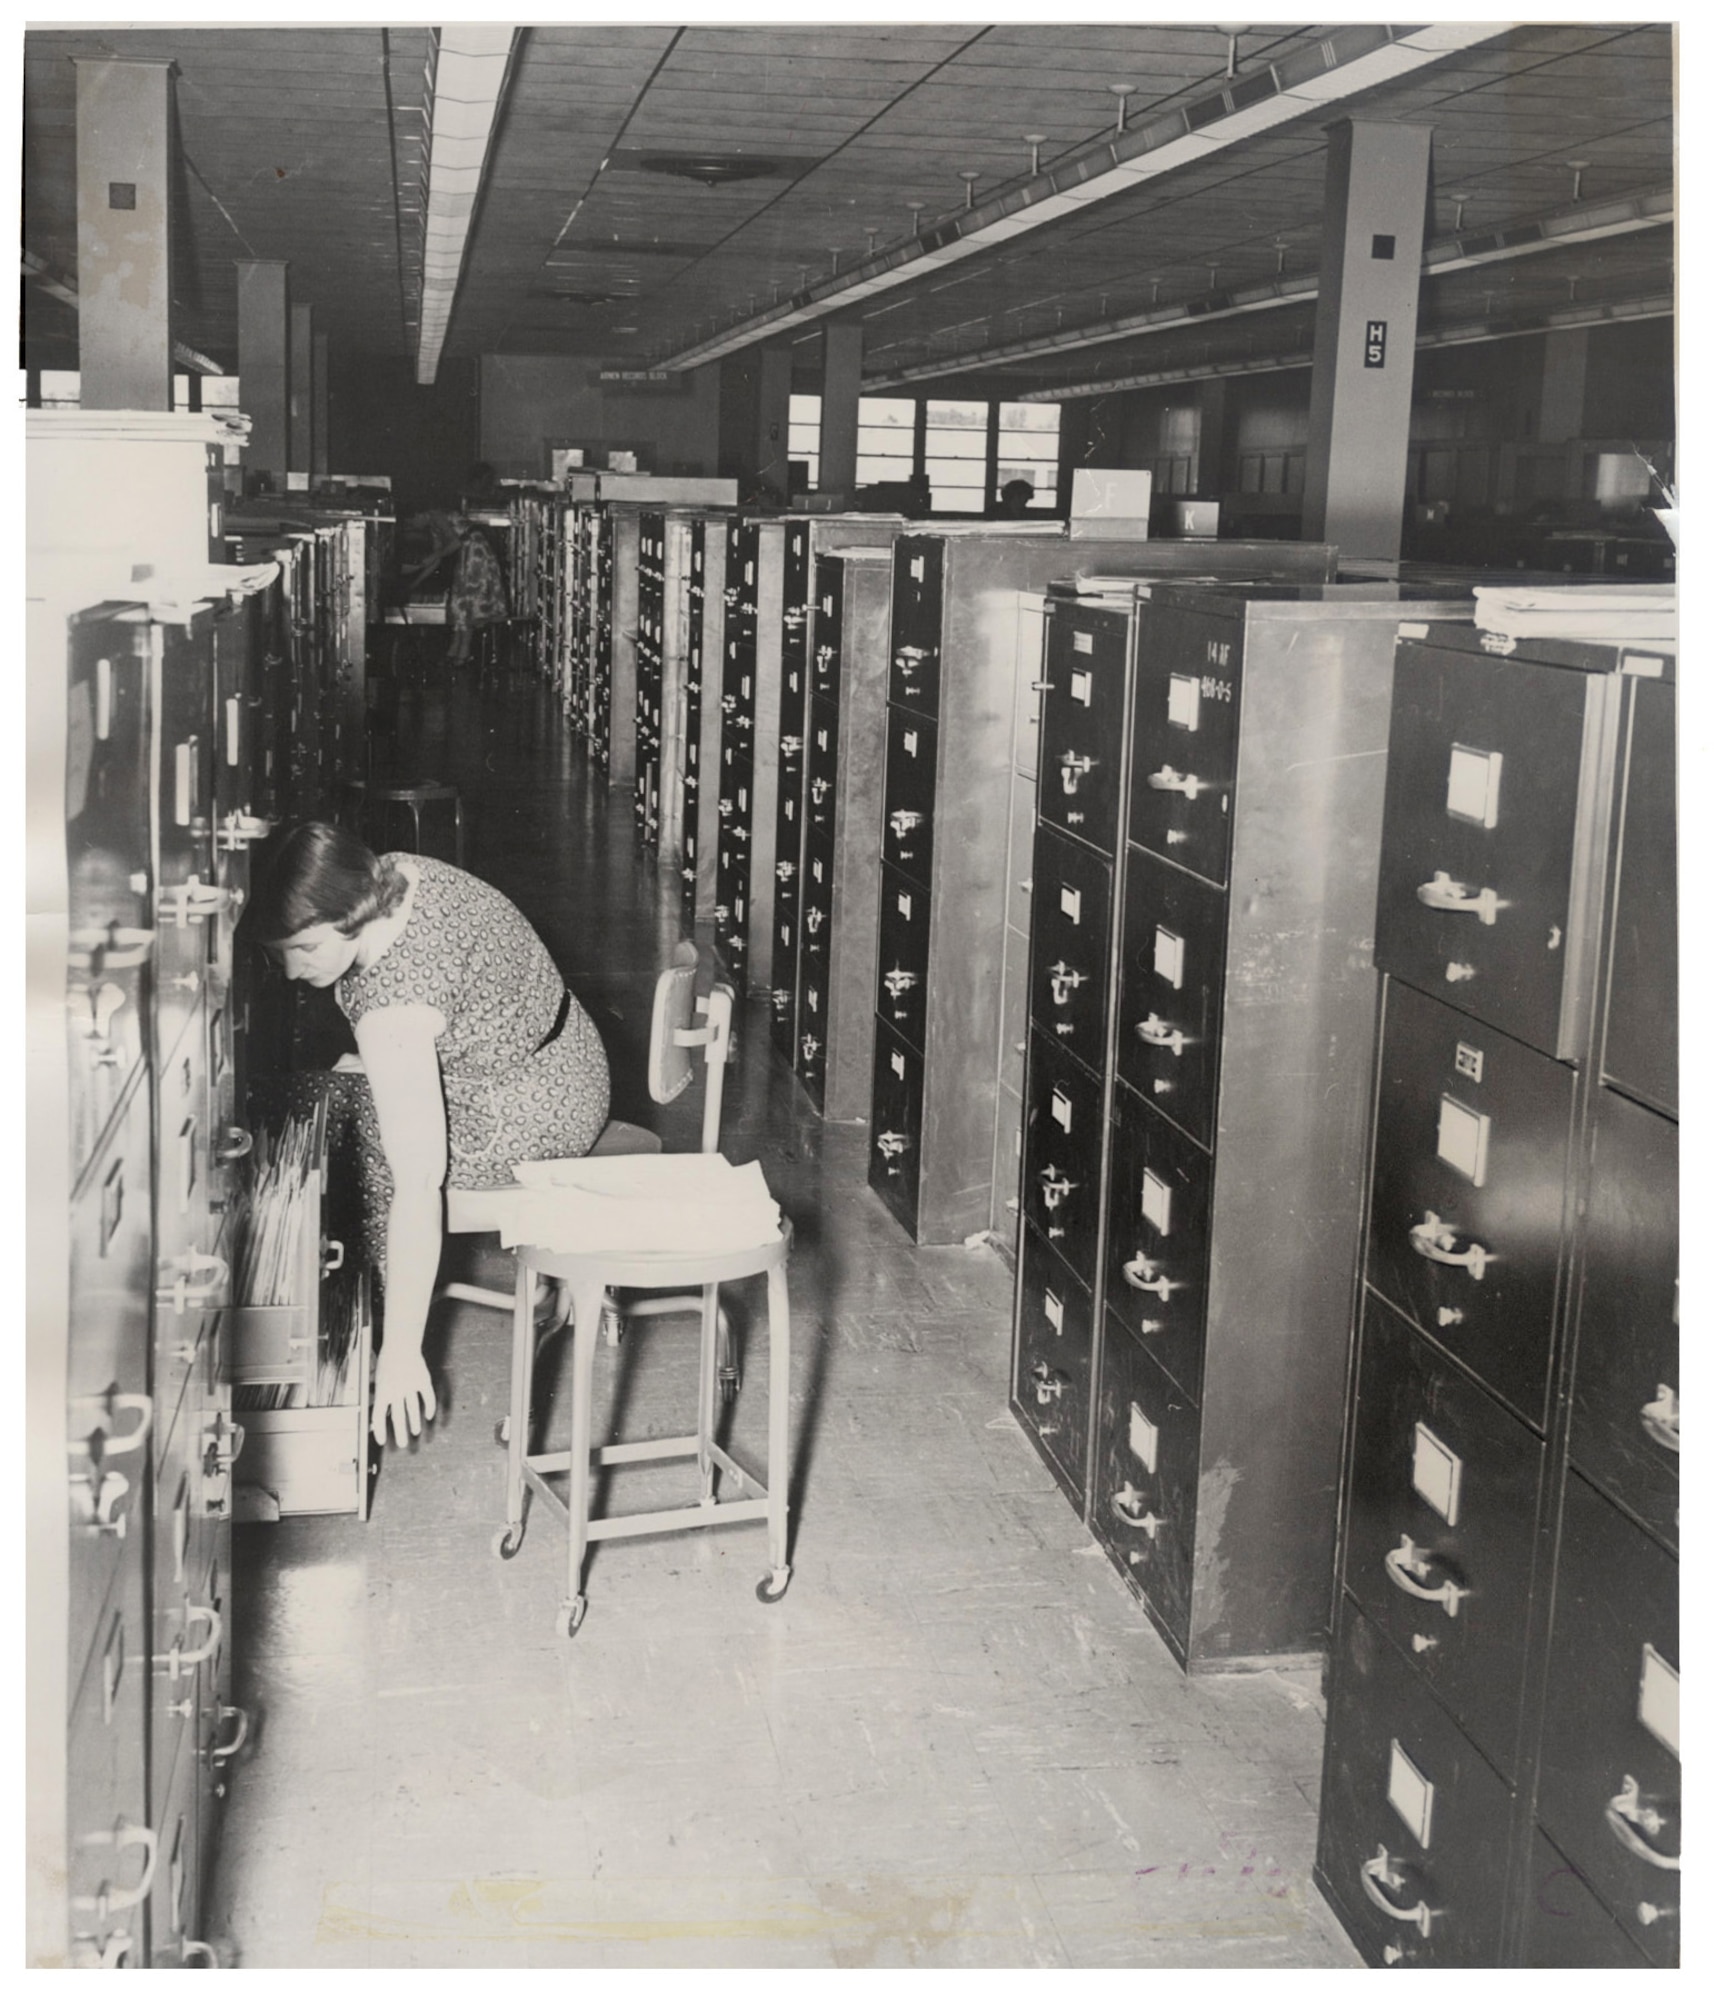 An Air Reserve Records Center employee files records in the file cabinet bank at the York Street building, Denver, Colo., in 1955. ARRC officially opened its doors March 1, 1954, almost 60 years ago. It wasn't until Sept. 1, 1965, that it was renamed the Air Reserve Personnel Center due to increasing involvement in all areas of personnel management and not only records. ARPC will celebrate their 60th birthday on Feb. 28, 2014.